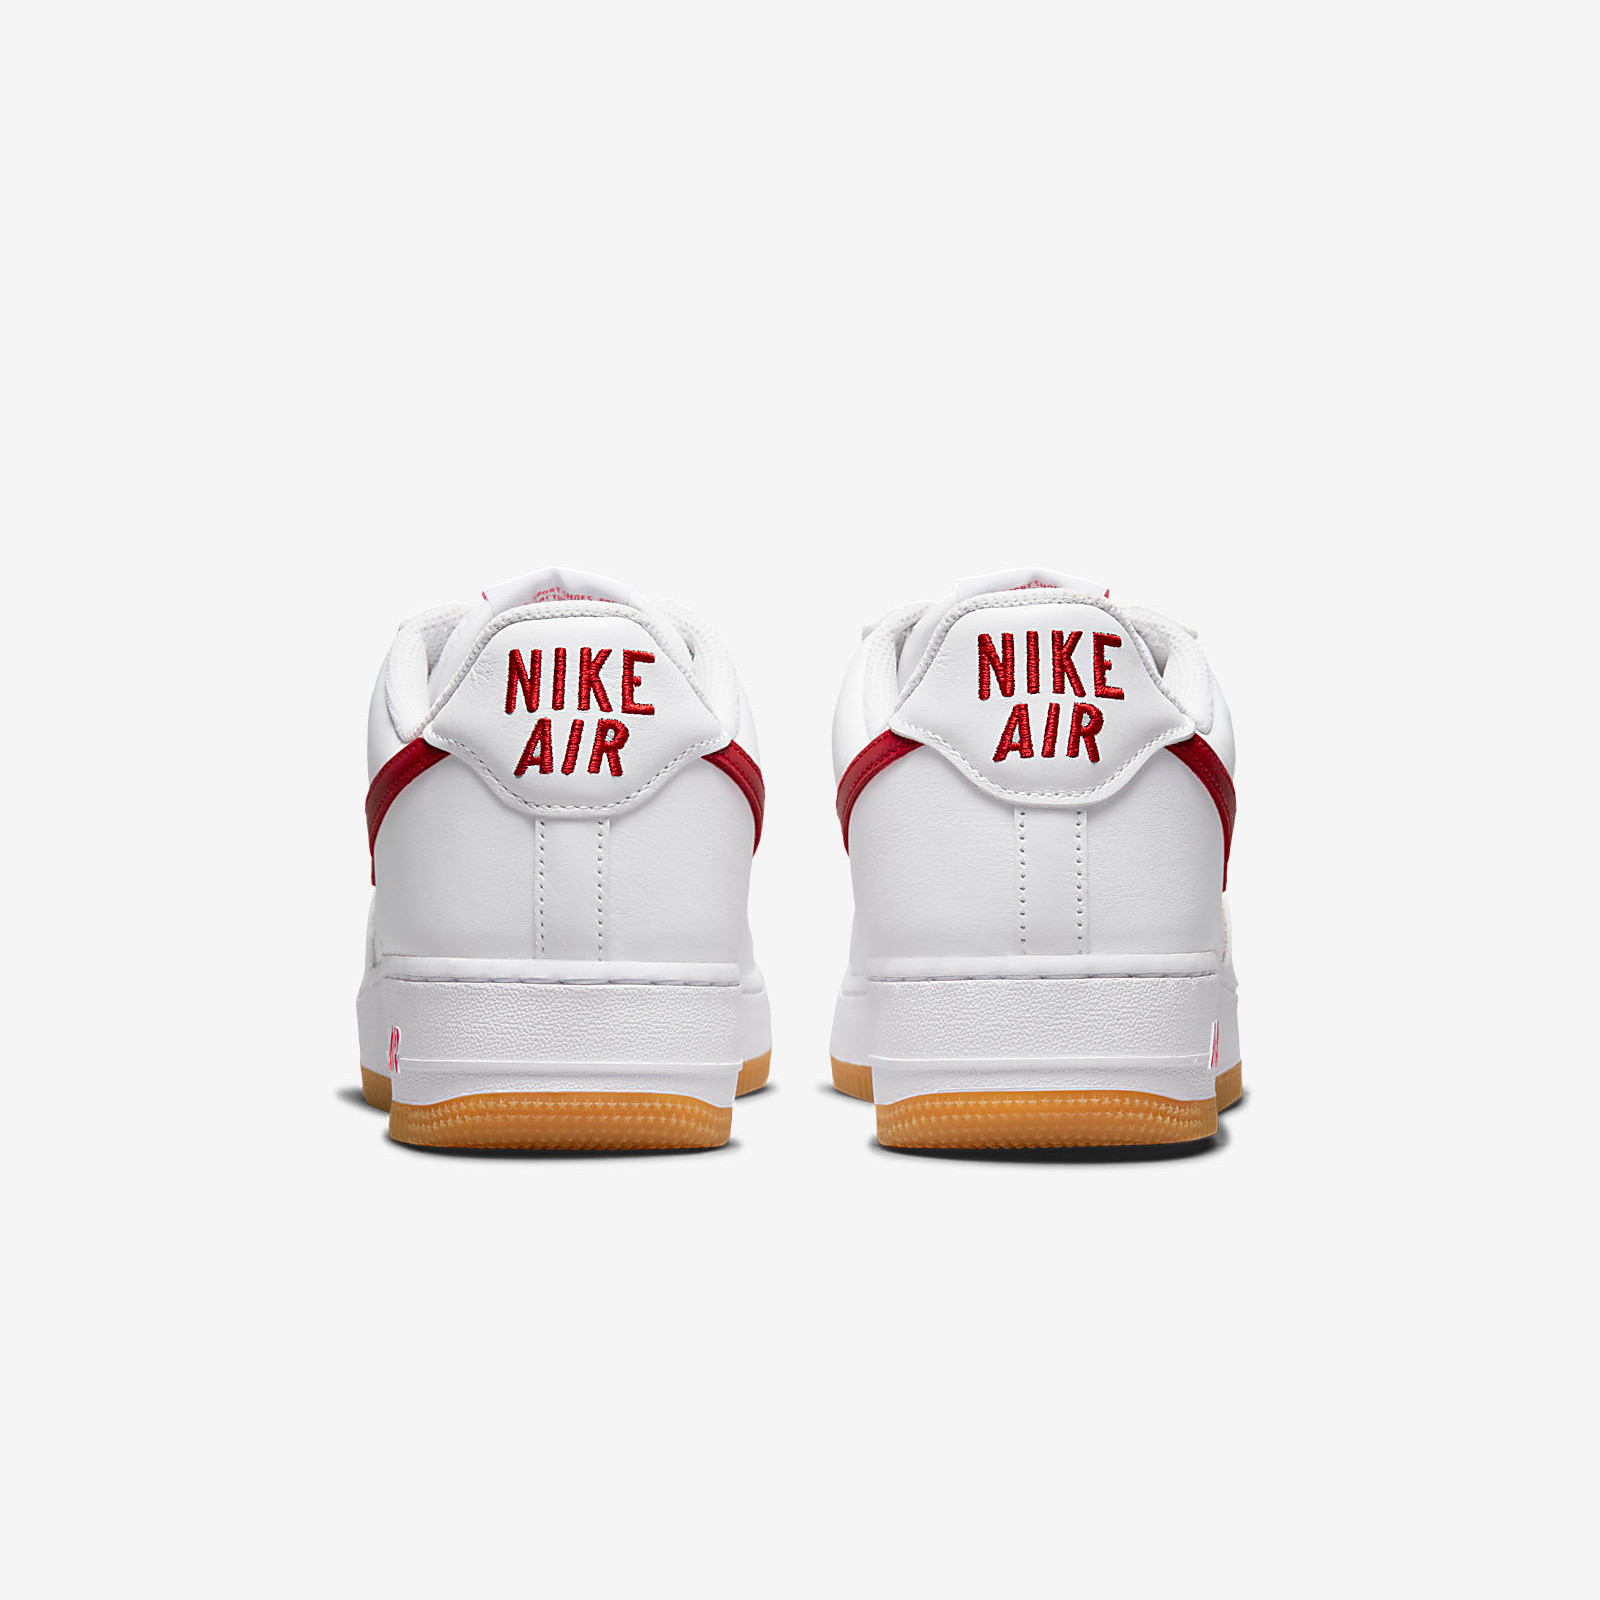 Nike Air Force 1 Low
Color of the Month
« University Red »